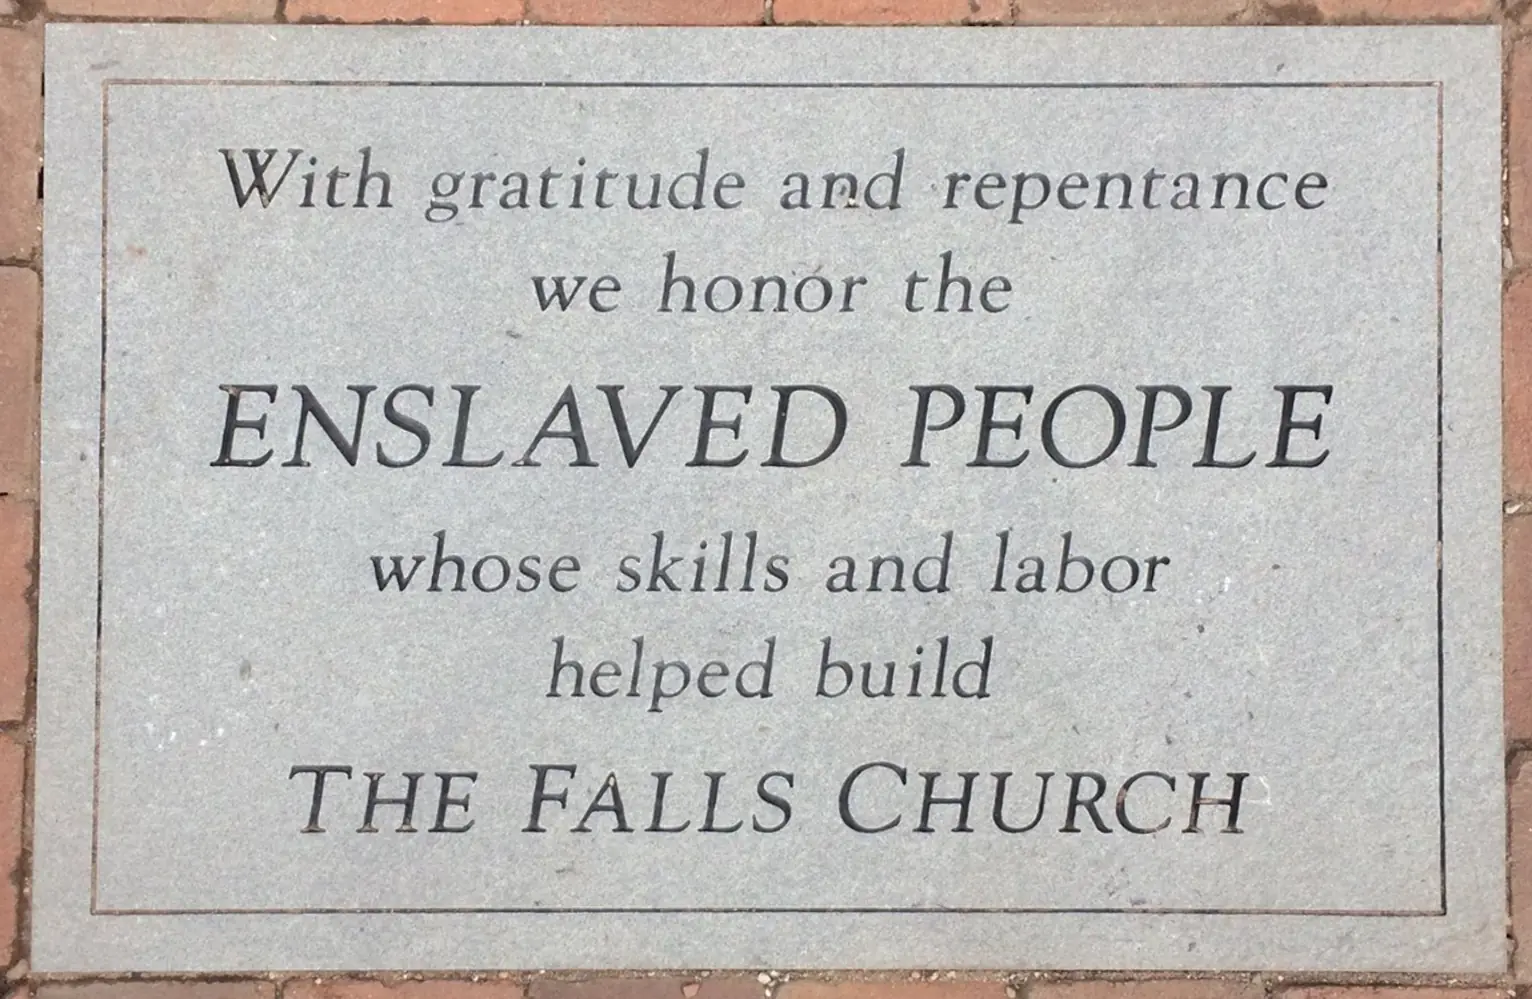 plaque was dedicated in 2017, offering gratitude and repentance for forced labor